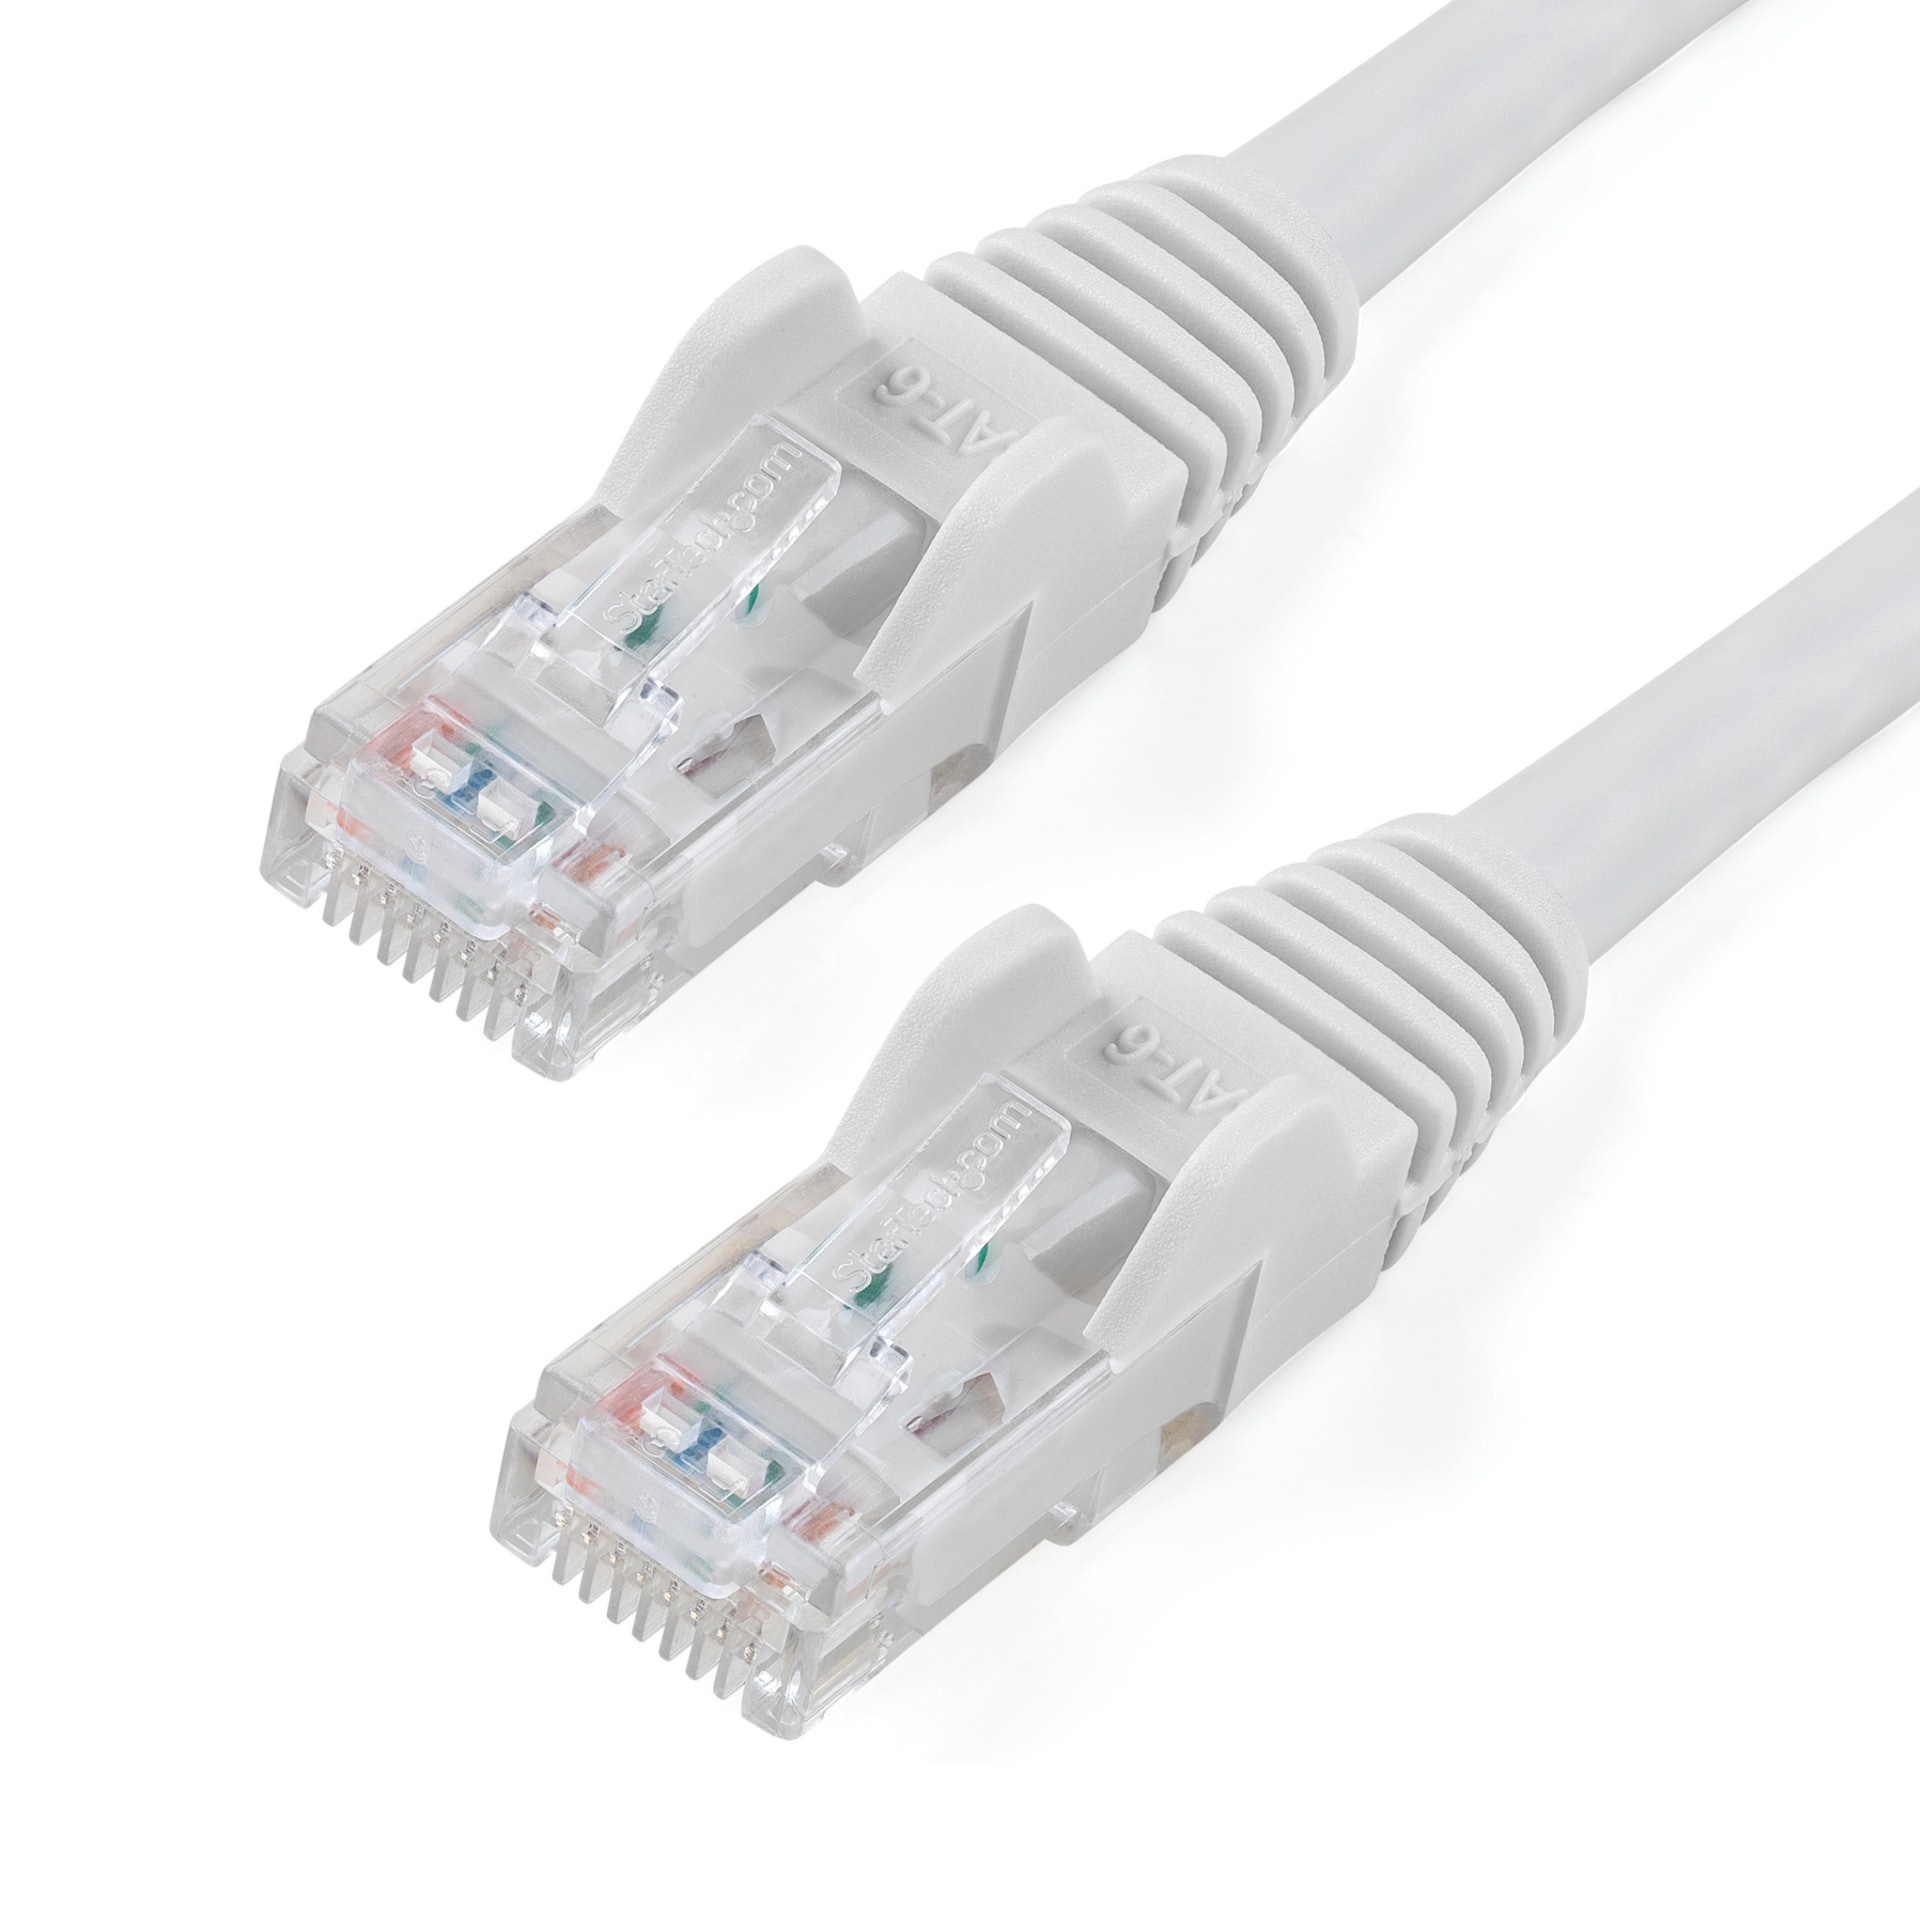 StarTech.com CAT6 Ethernet Cable 14' White 650MHz PoE Snagless Patch Cord